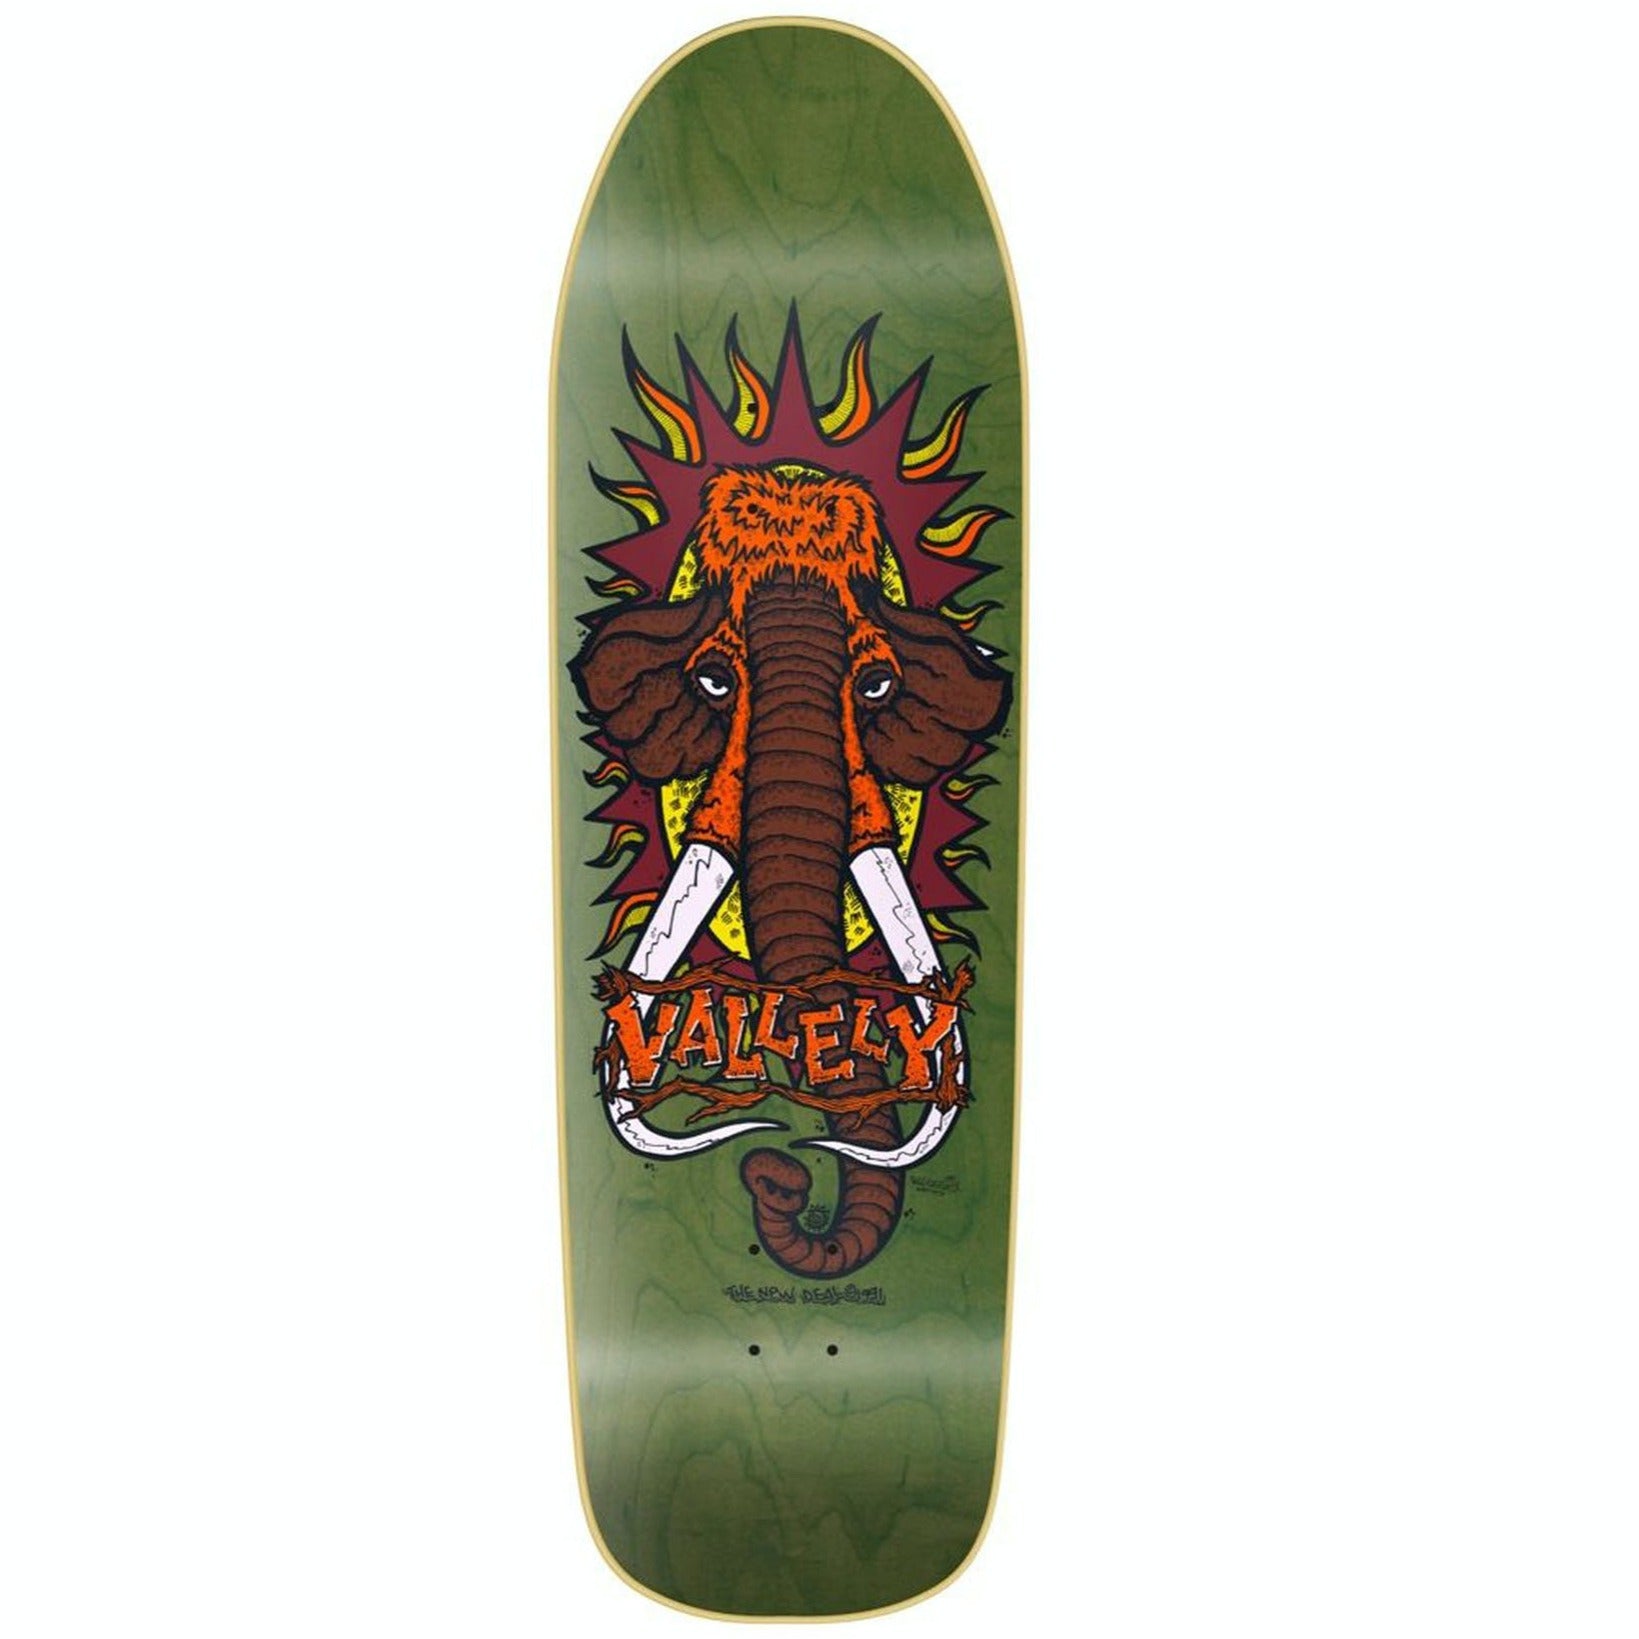 NEW DEAL DECK - VALLELY MAMMOTH GREEN STAIN (9.5")